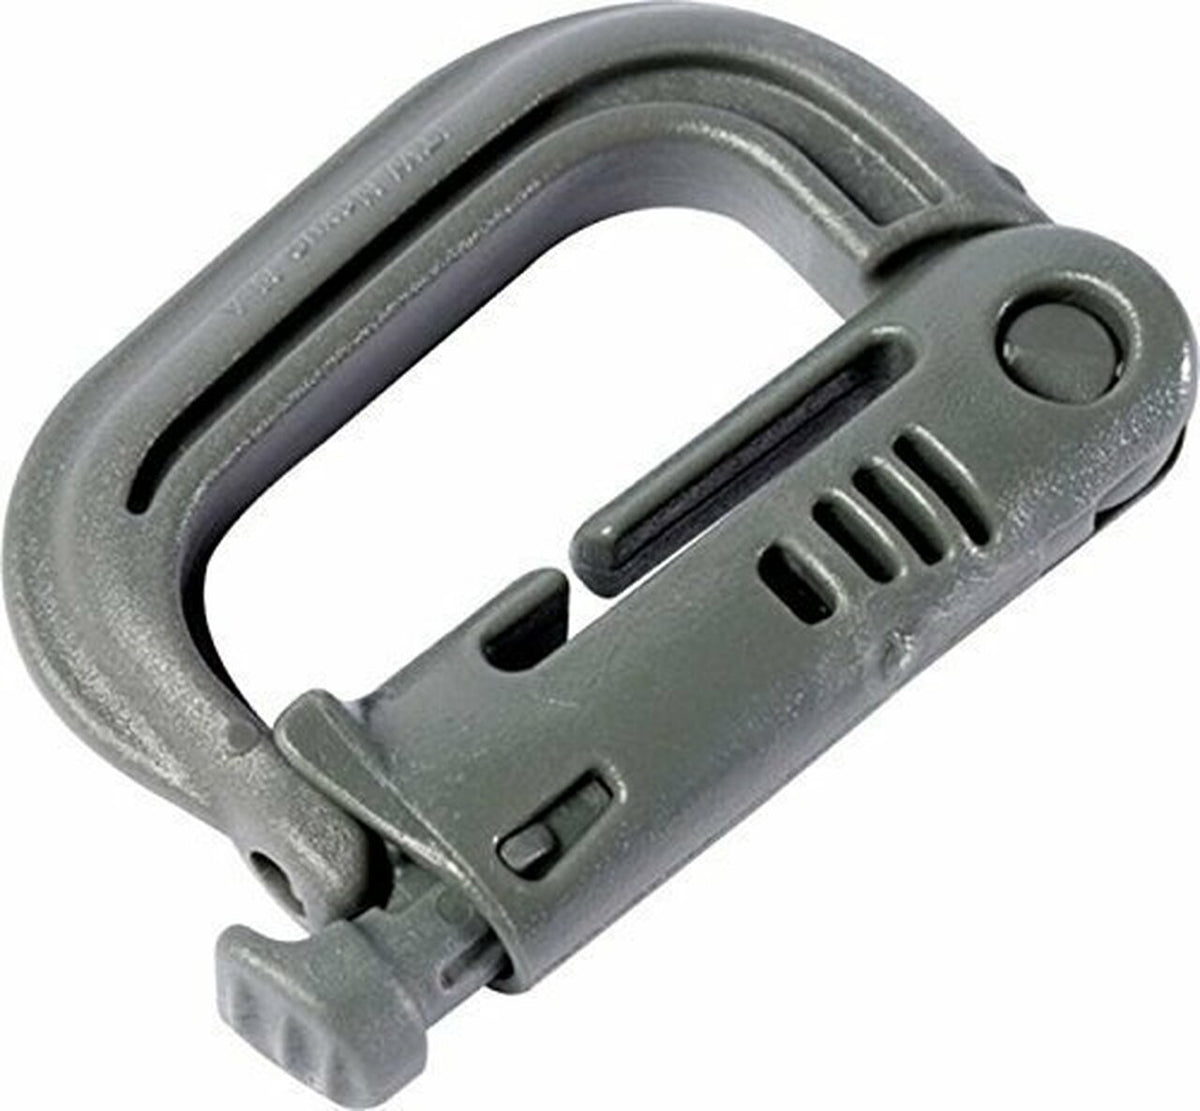 ITW Nexus Military Carabiner Grimloc D-Ring Vest Backpack Keychain Clip  Snap Foliage Green